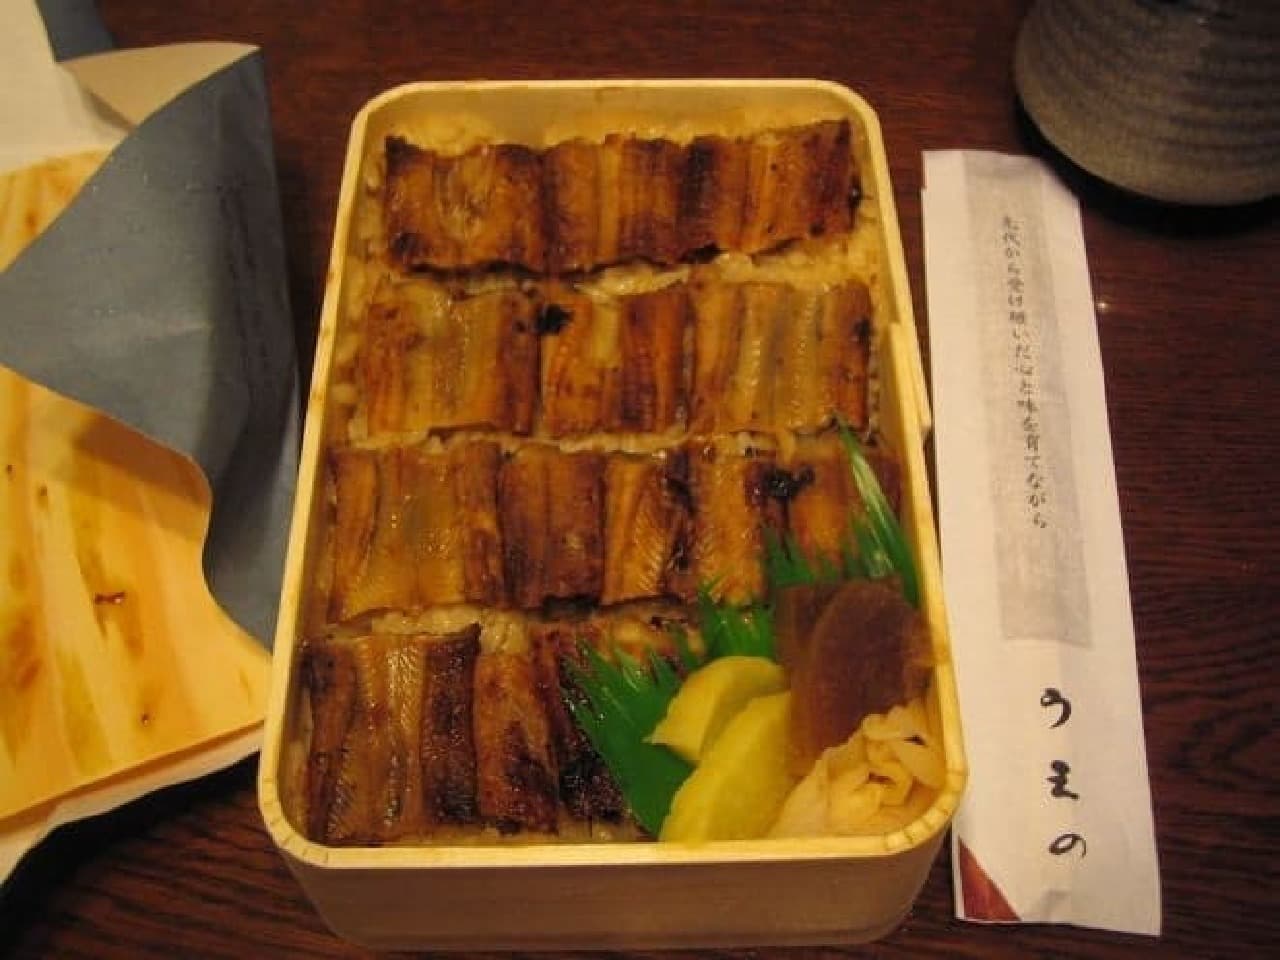 This is anagomeshi (the image is a lunch box sold at Miyajimaguchi station "Ueno")